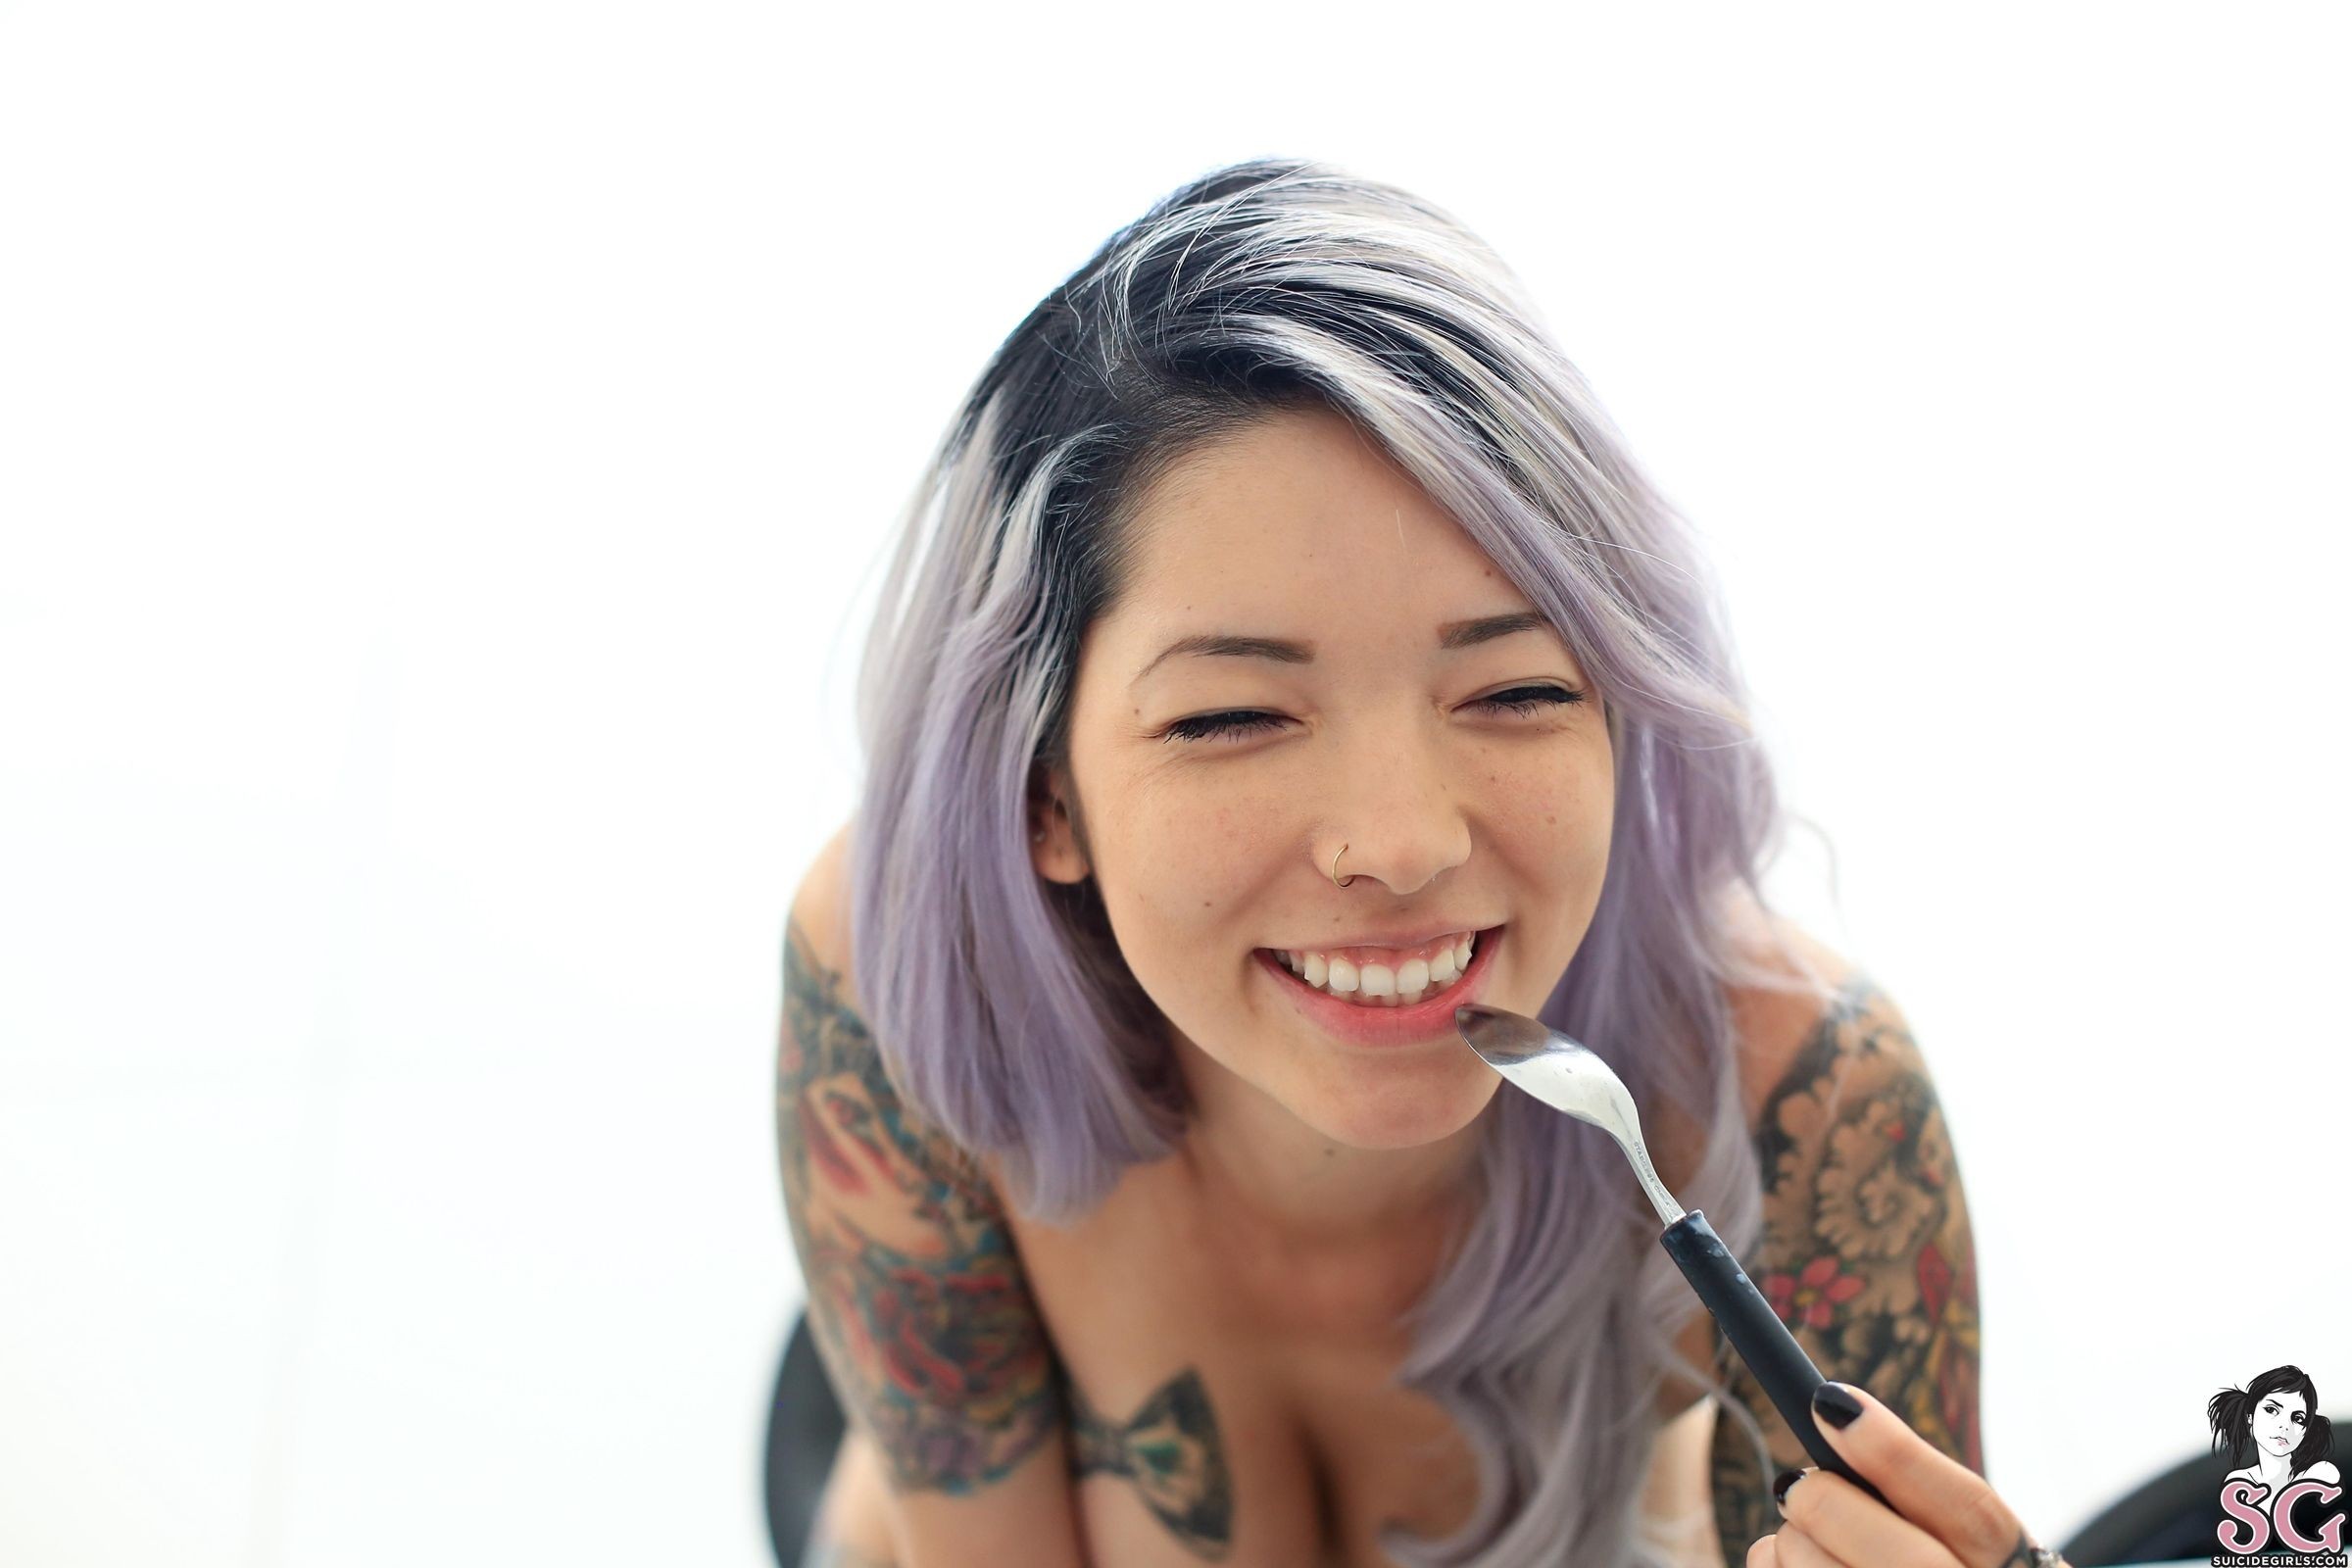 People 2400x1600 Myca Suicide Suicide Girls tattoo inked girls Asian dyed hair pierced nose smiling women